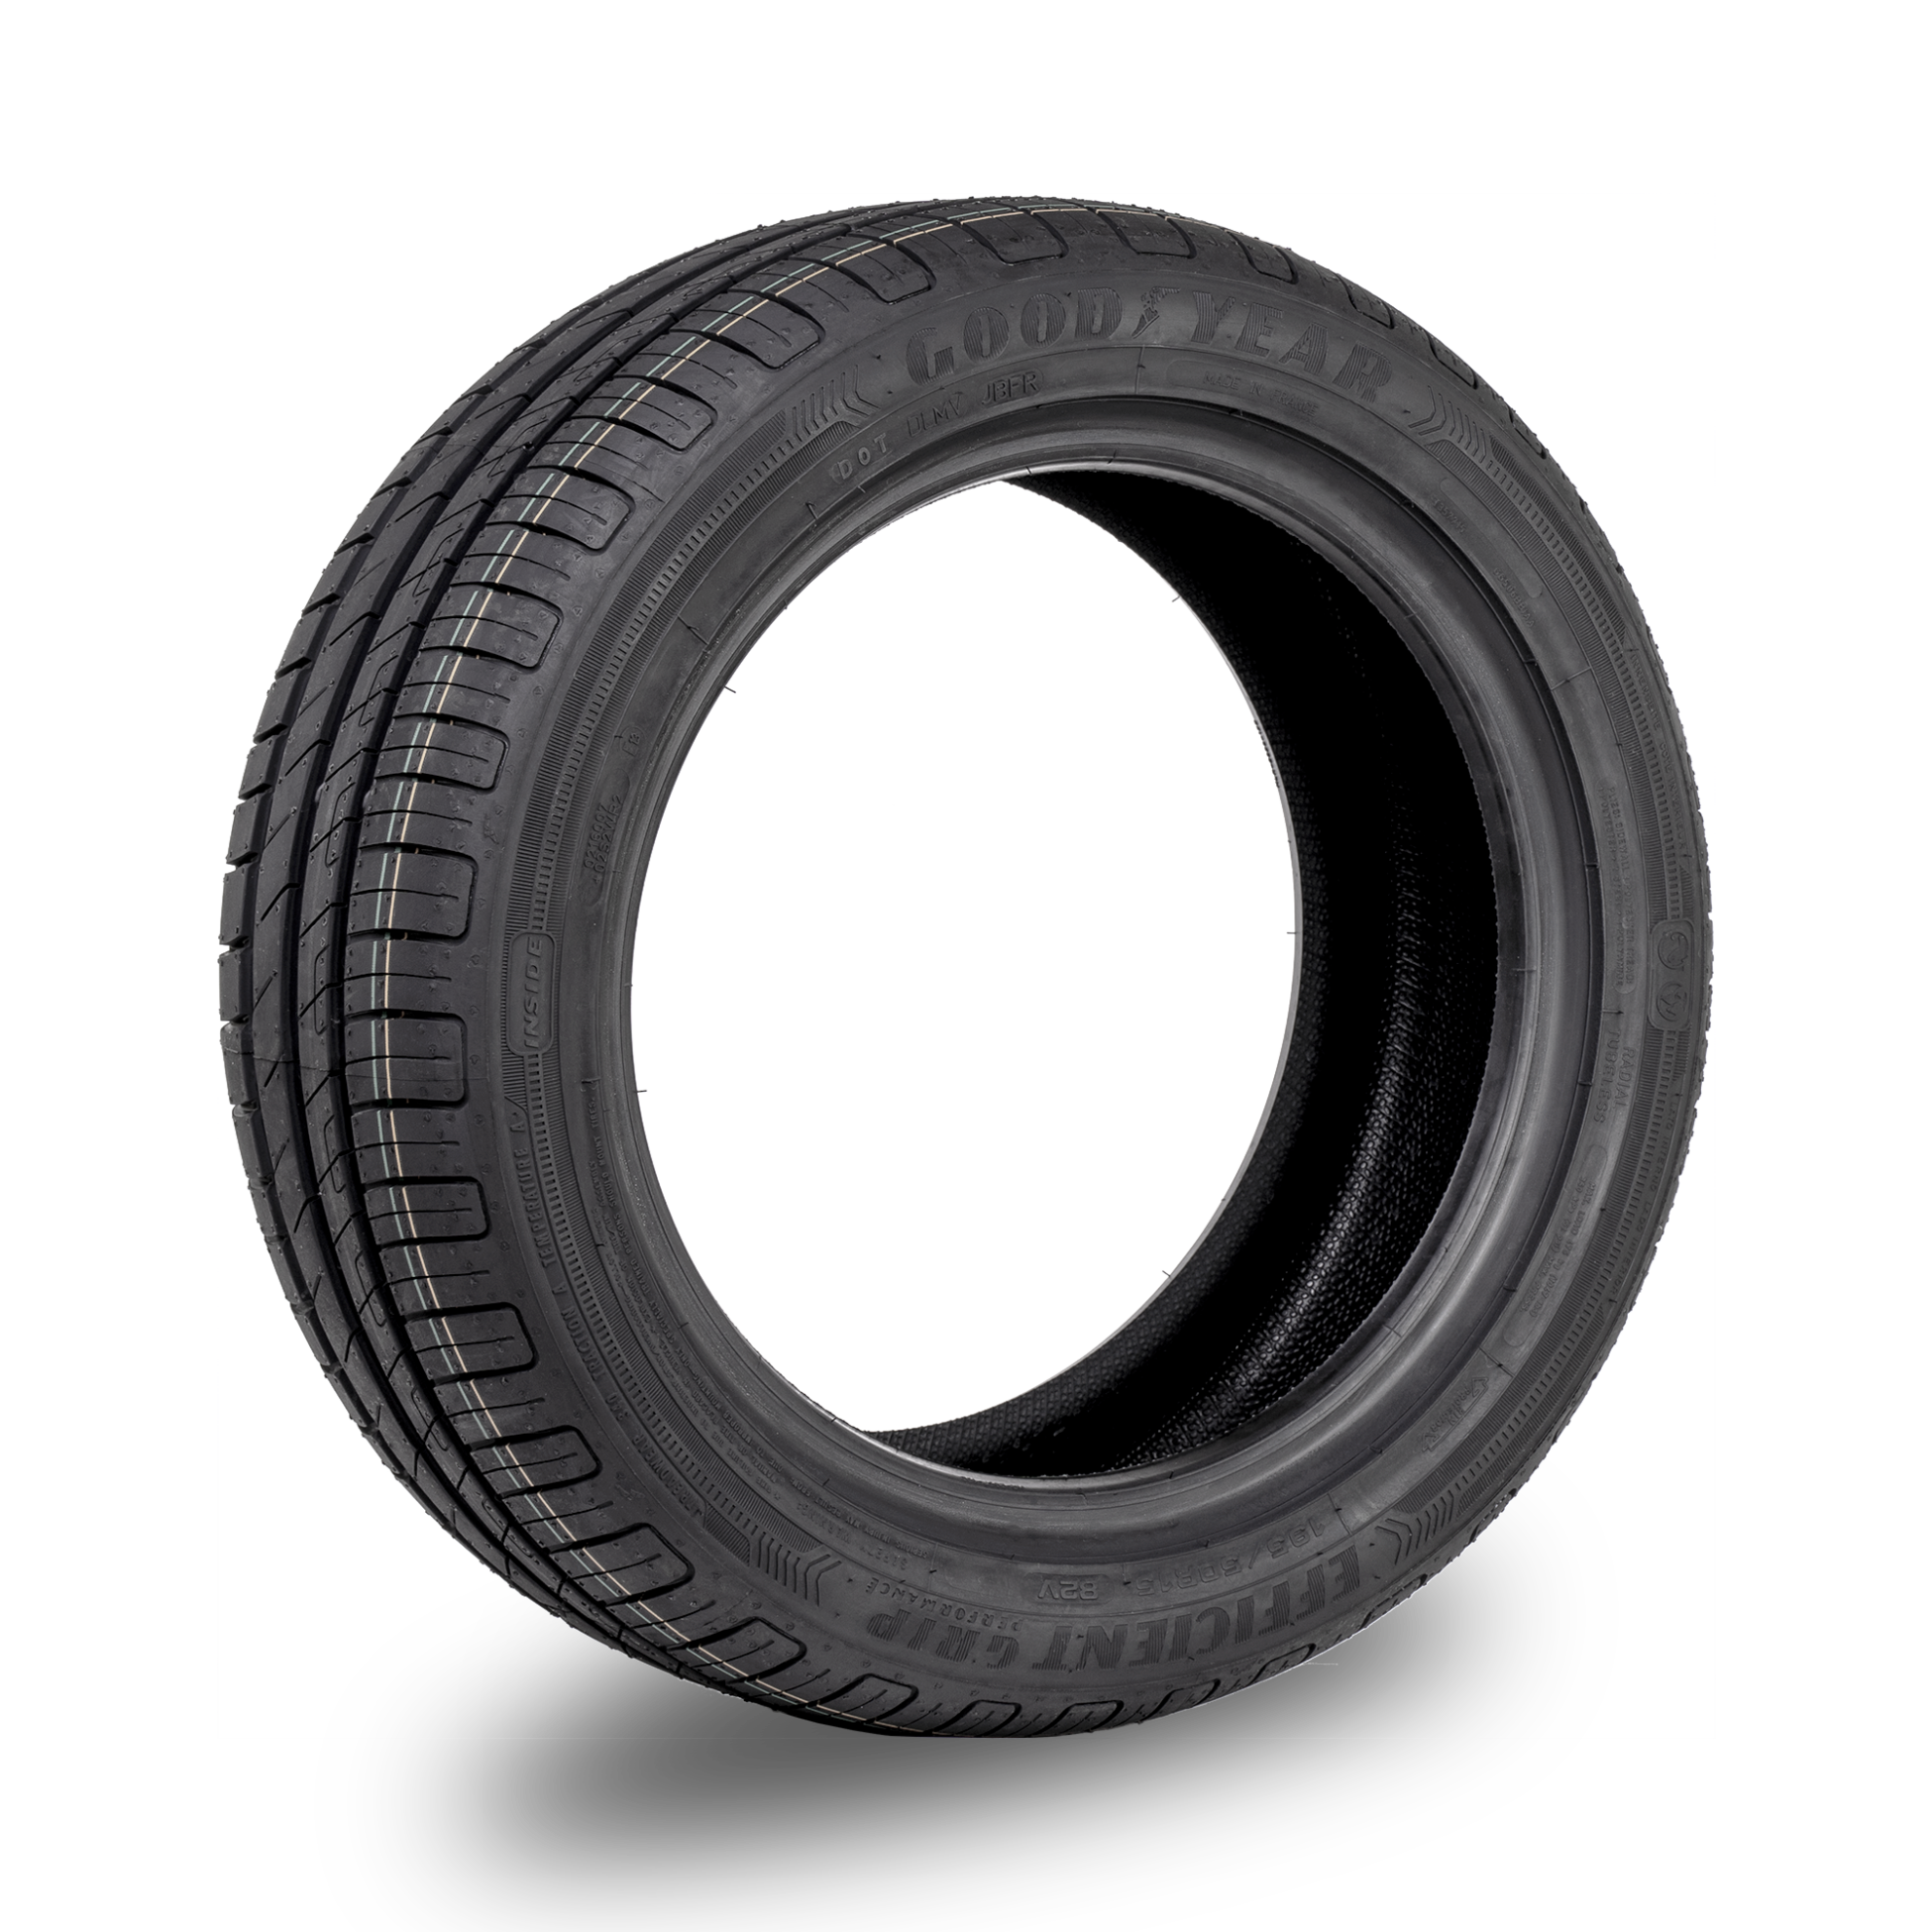 Bloody strijd Hectare 195/55/16 Goodyear EfficientGrip Performance 91V Tyre - 4x4 Tyres